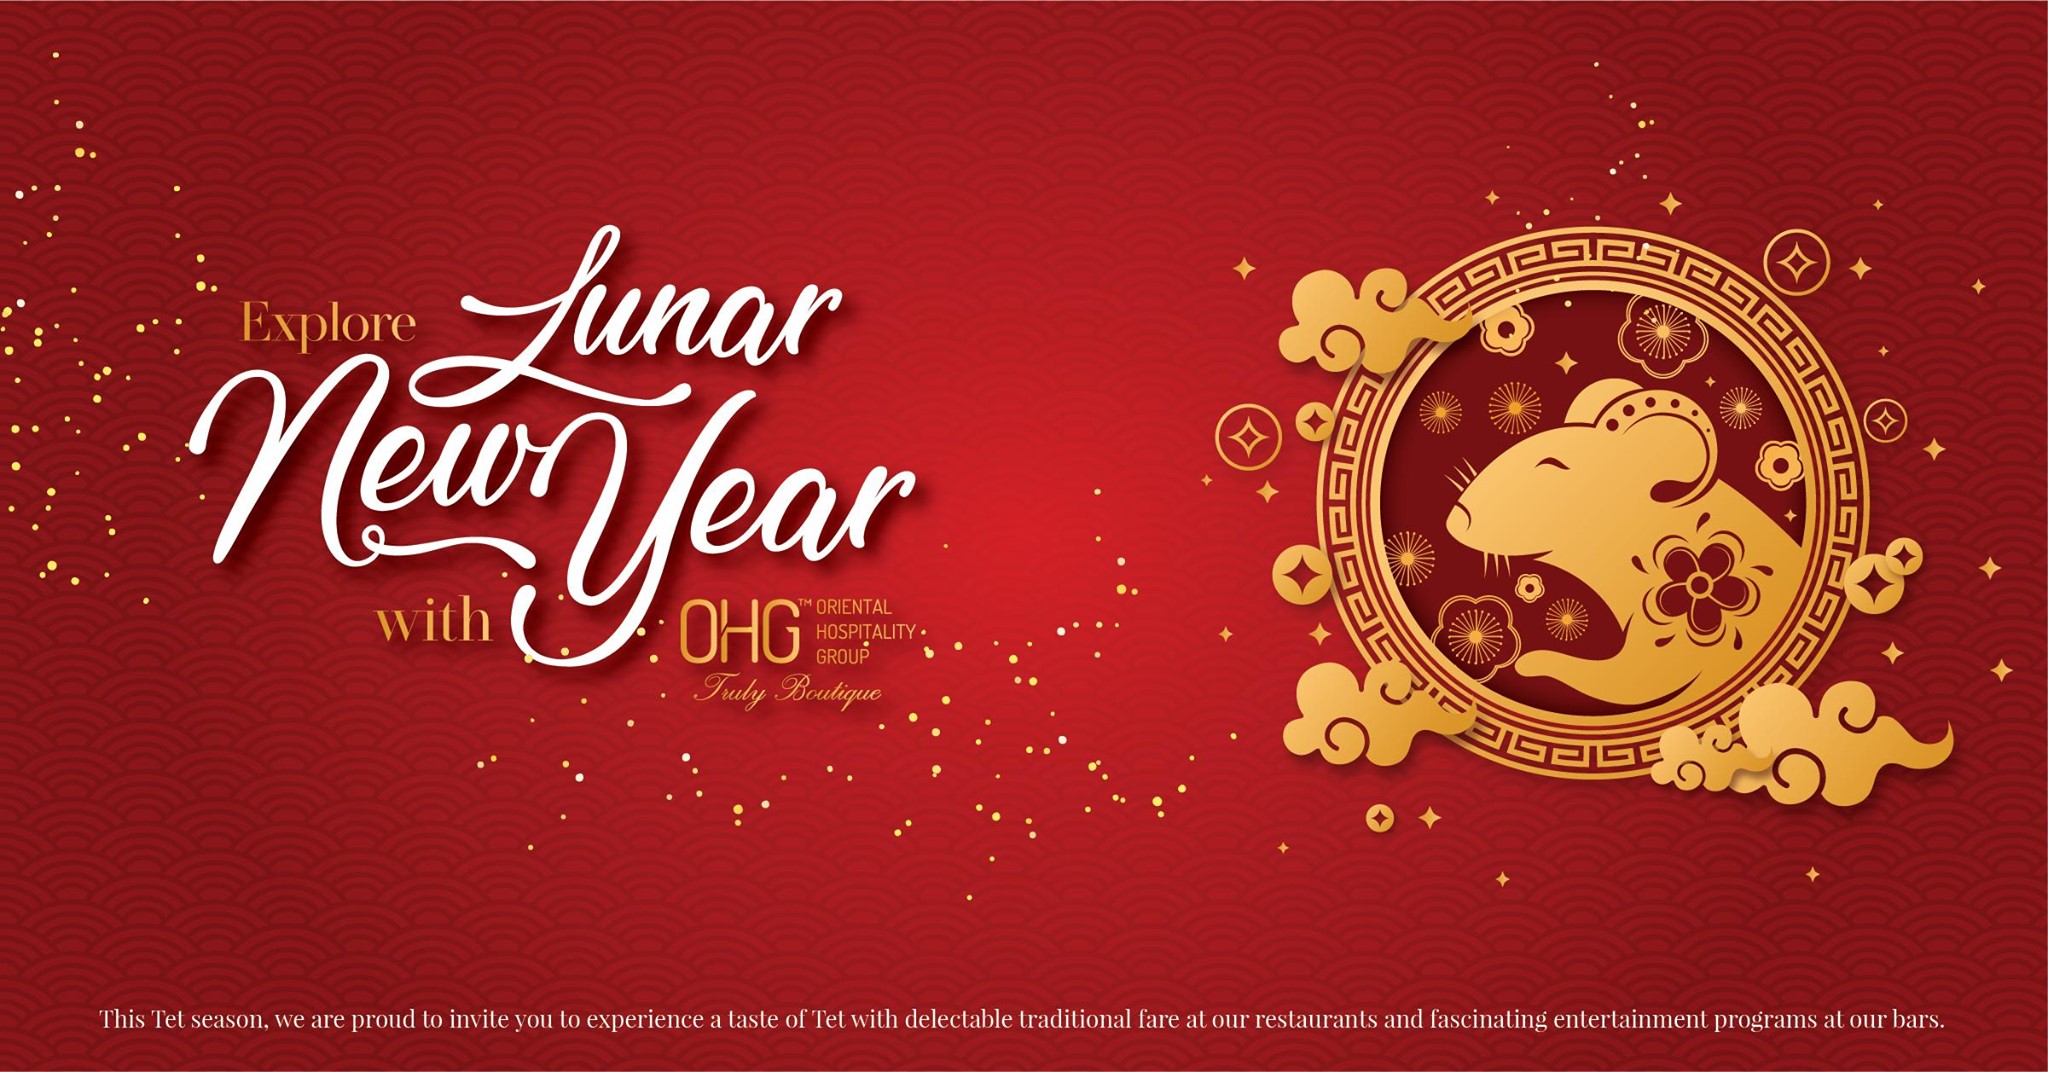 Explore Lunar New Year 2020 with OHG